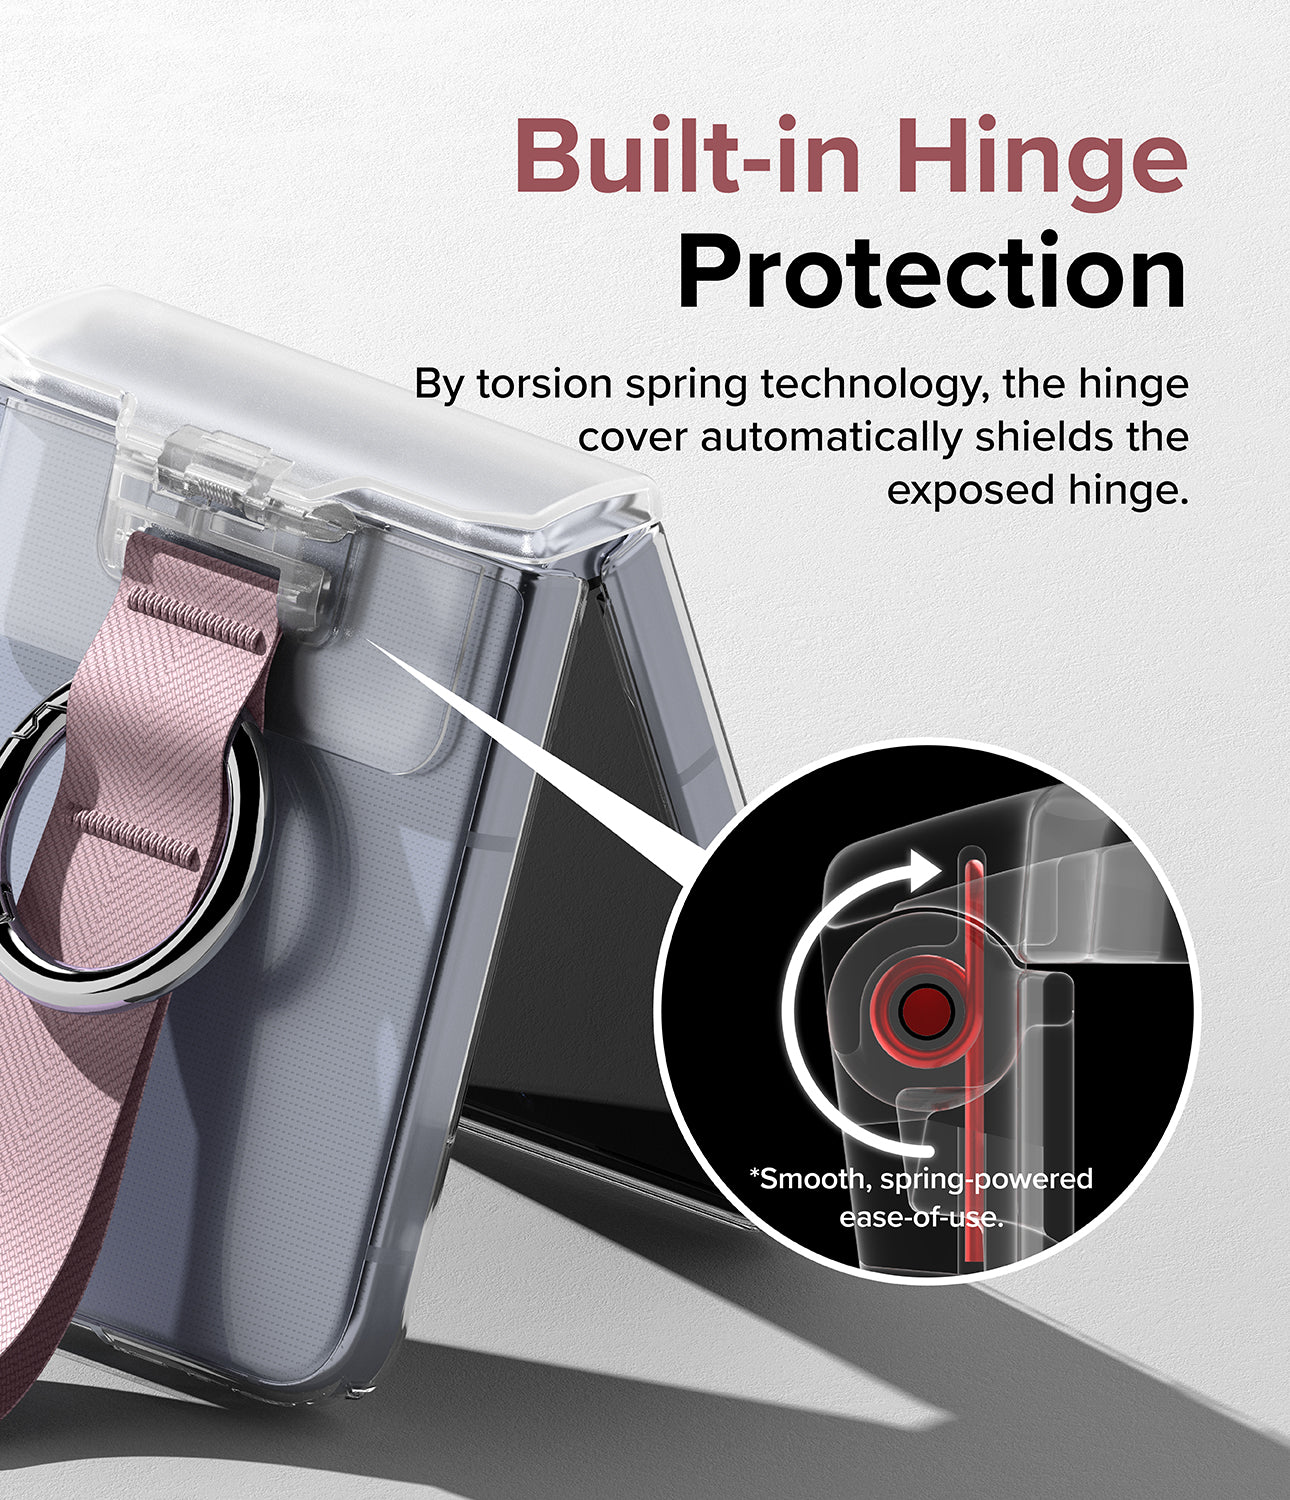 Built-in Hinge Protection